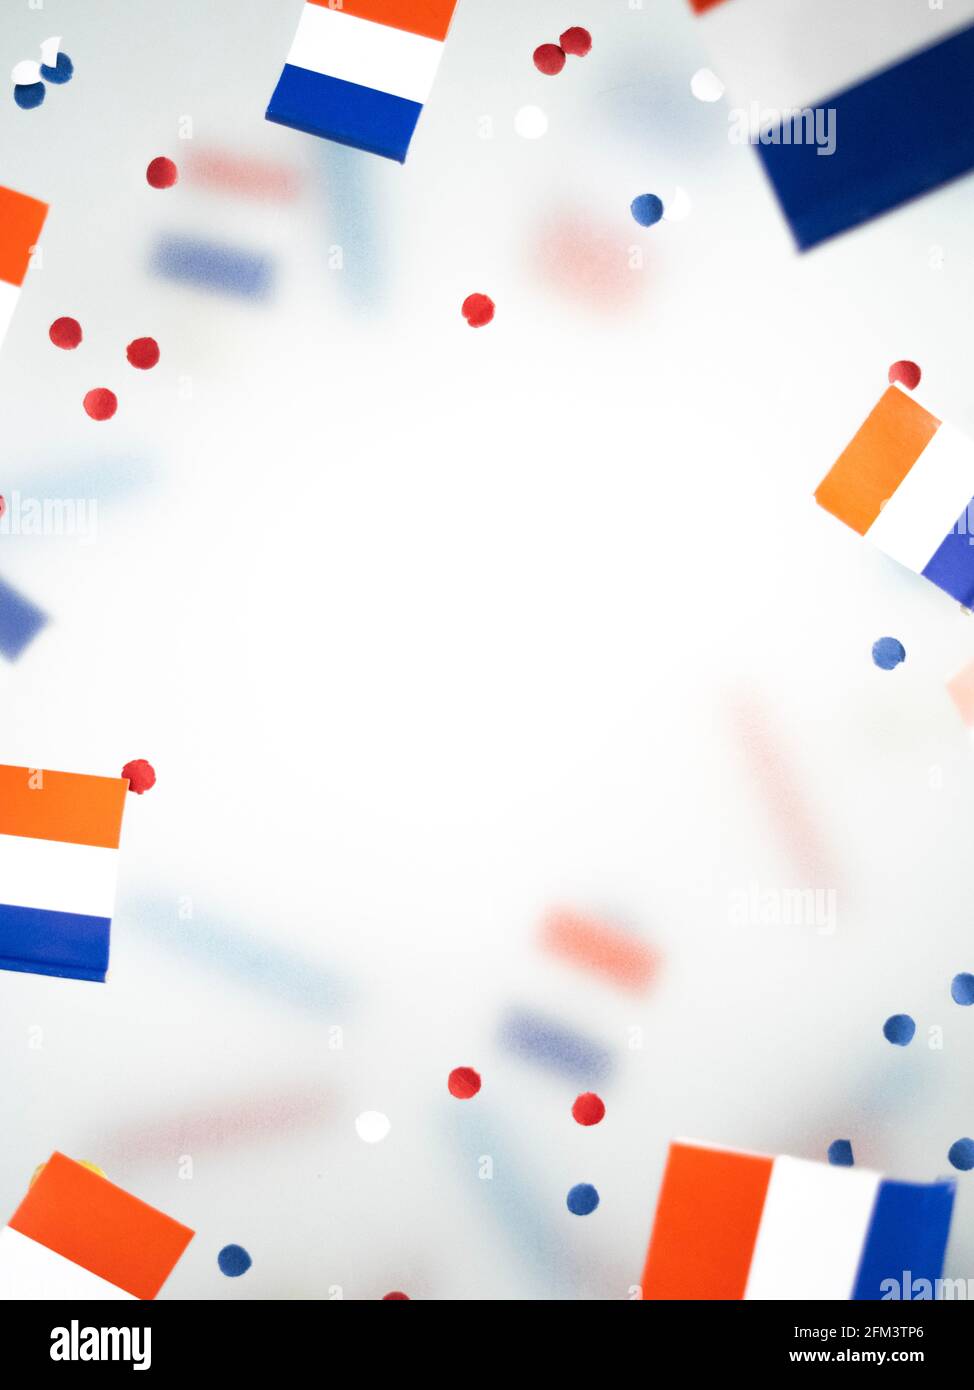 national holiday of July 14 is a happy Independence Day of France, Bastille Day, the concept of patriotism, memory,  confetti and flags Stock Photo